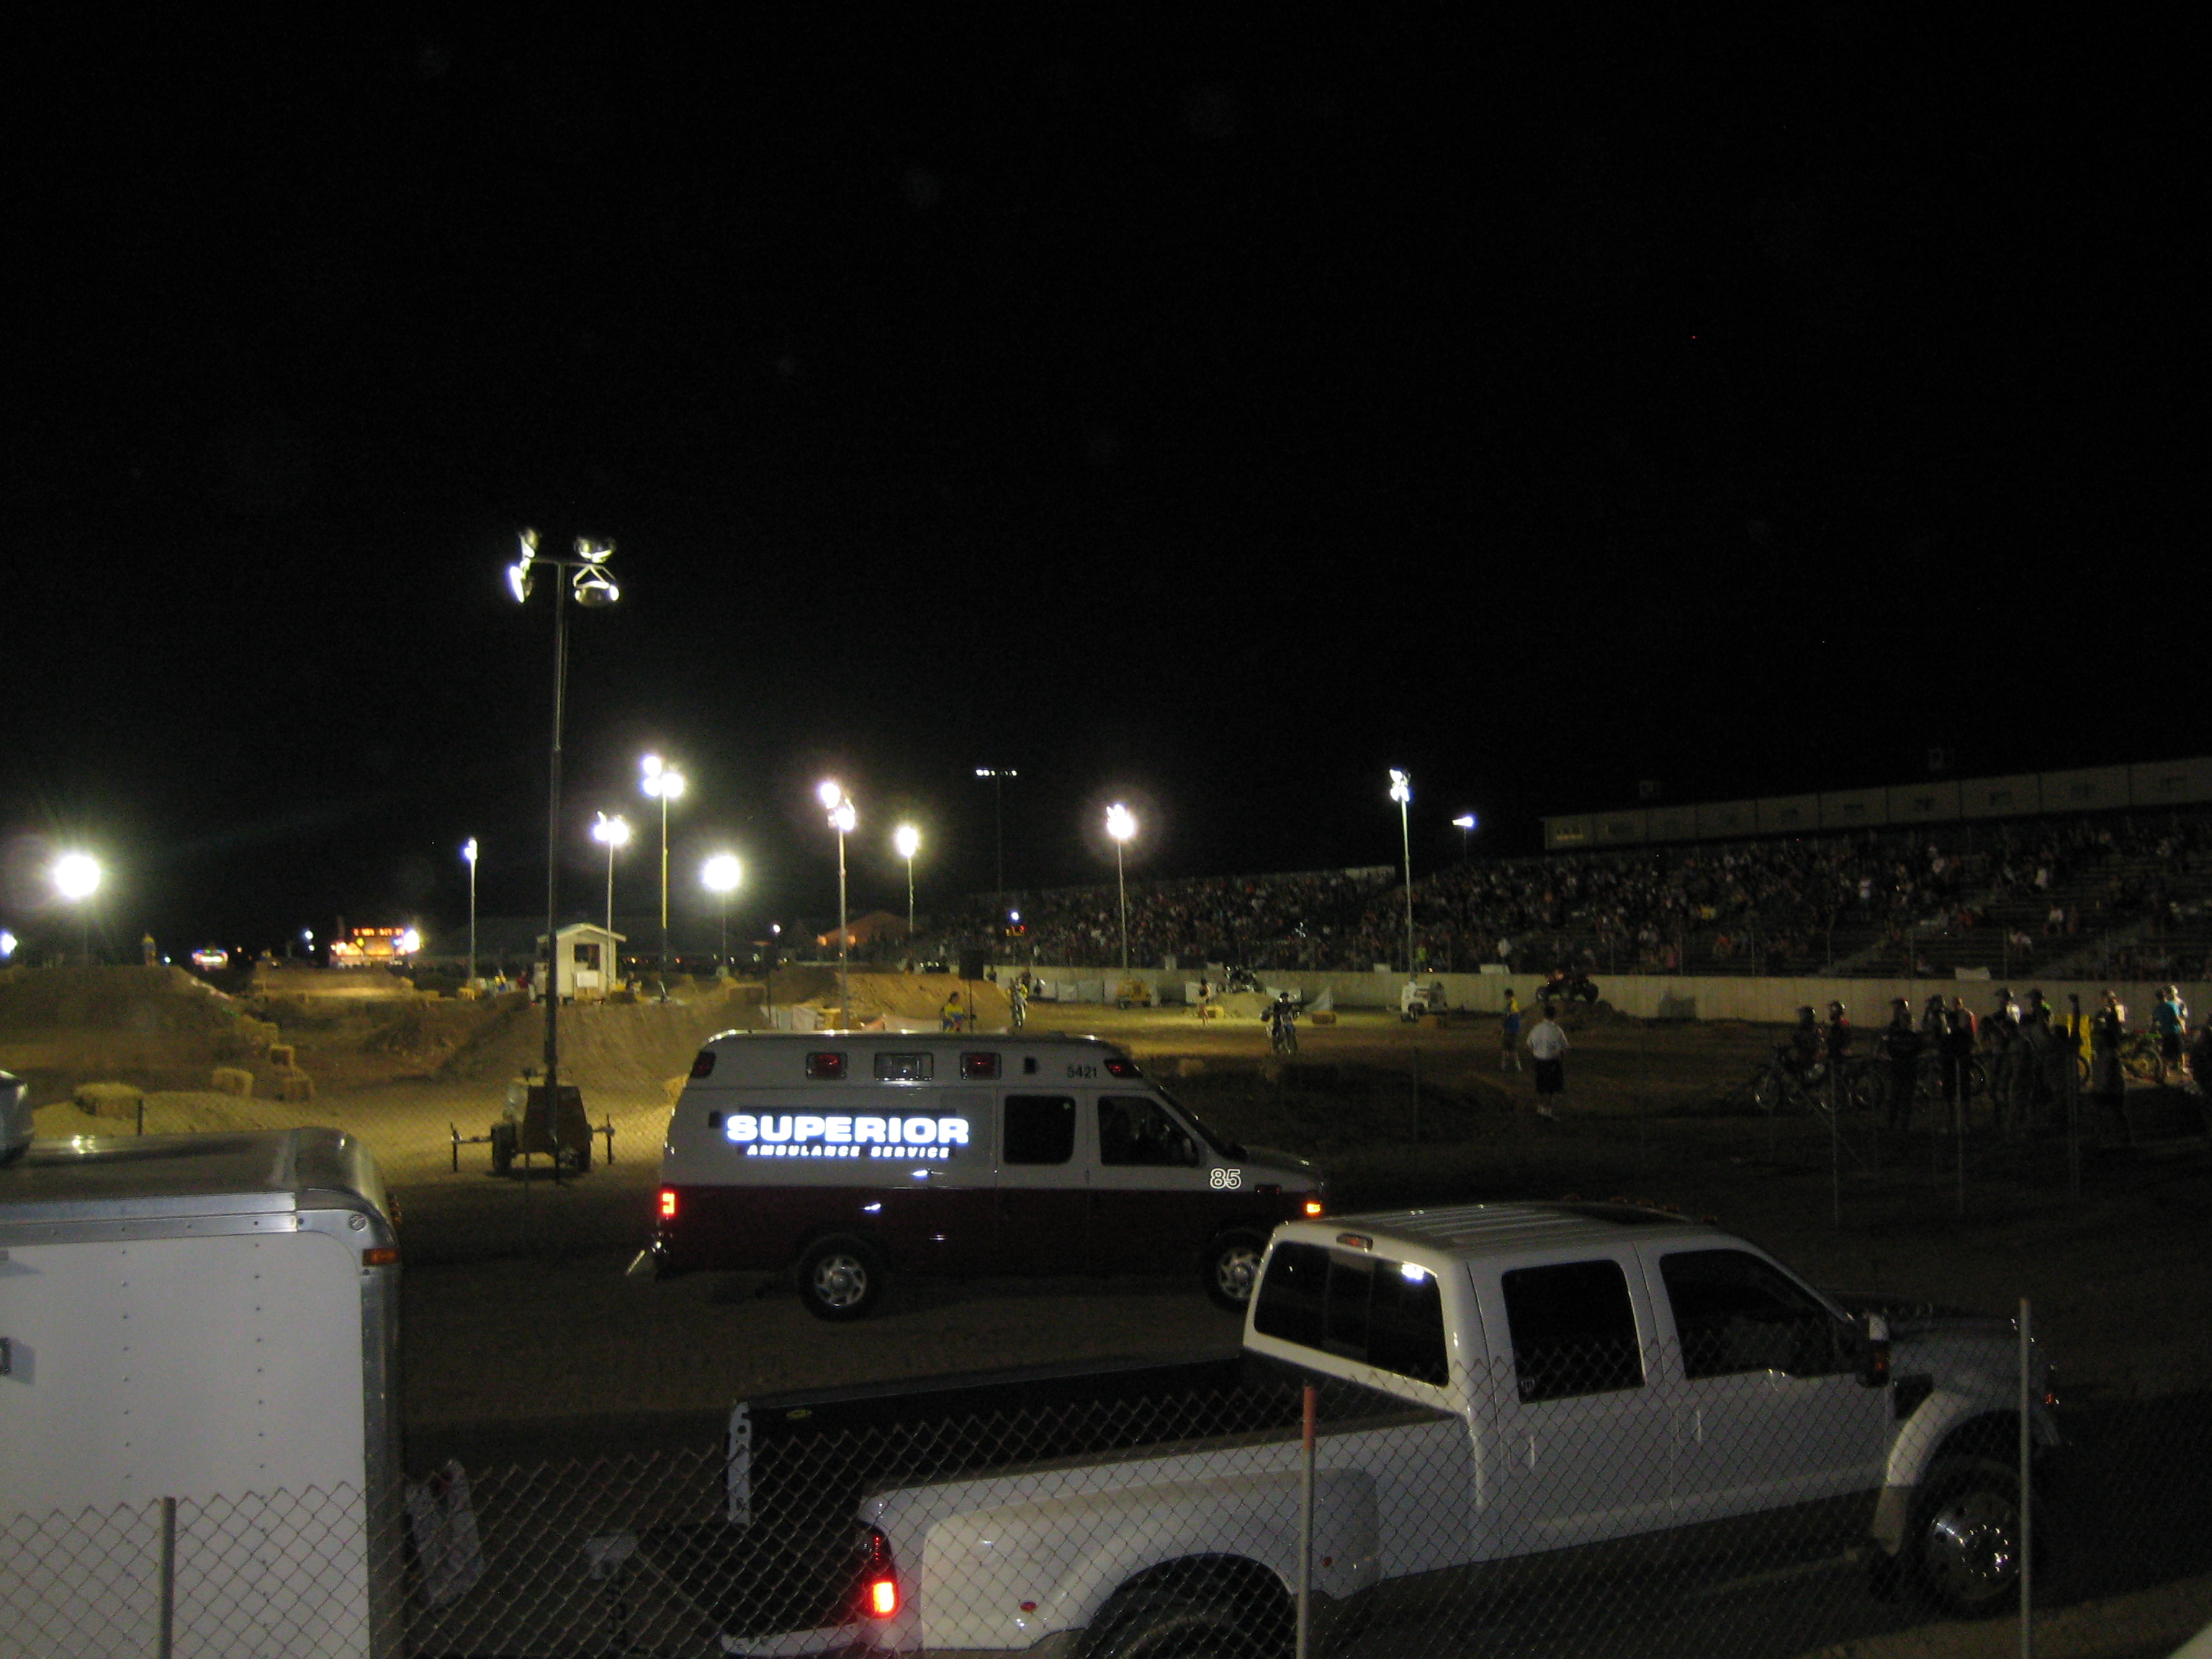 The track under the lights